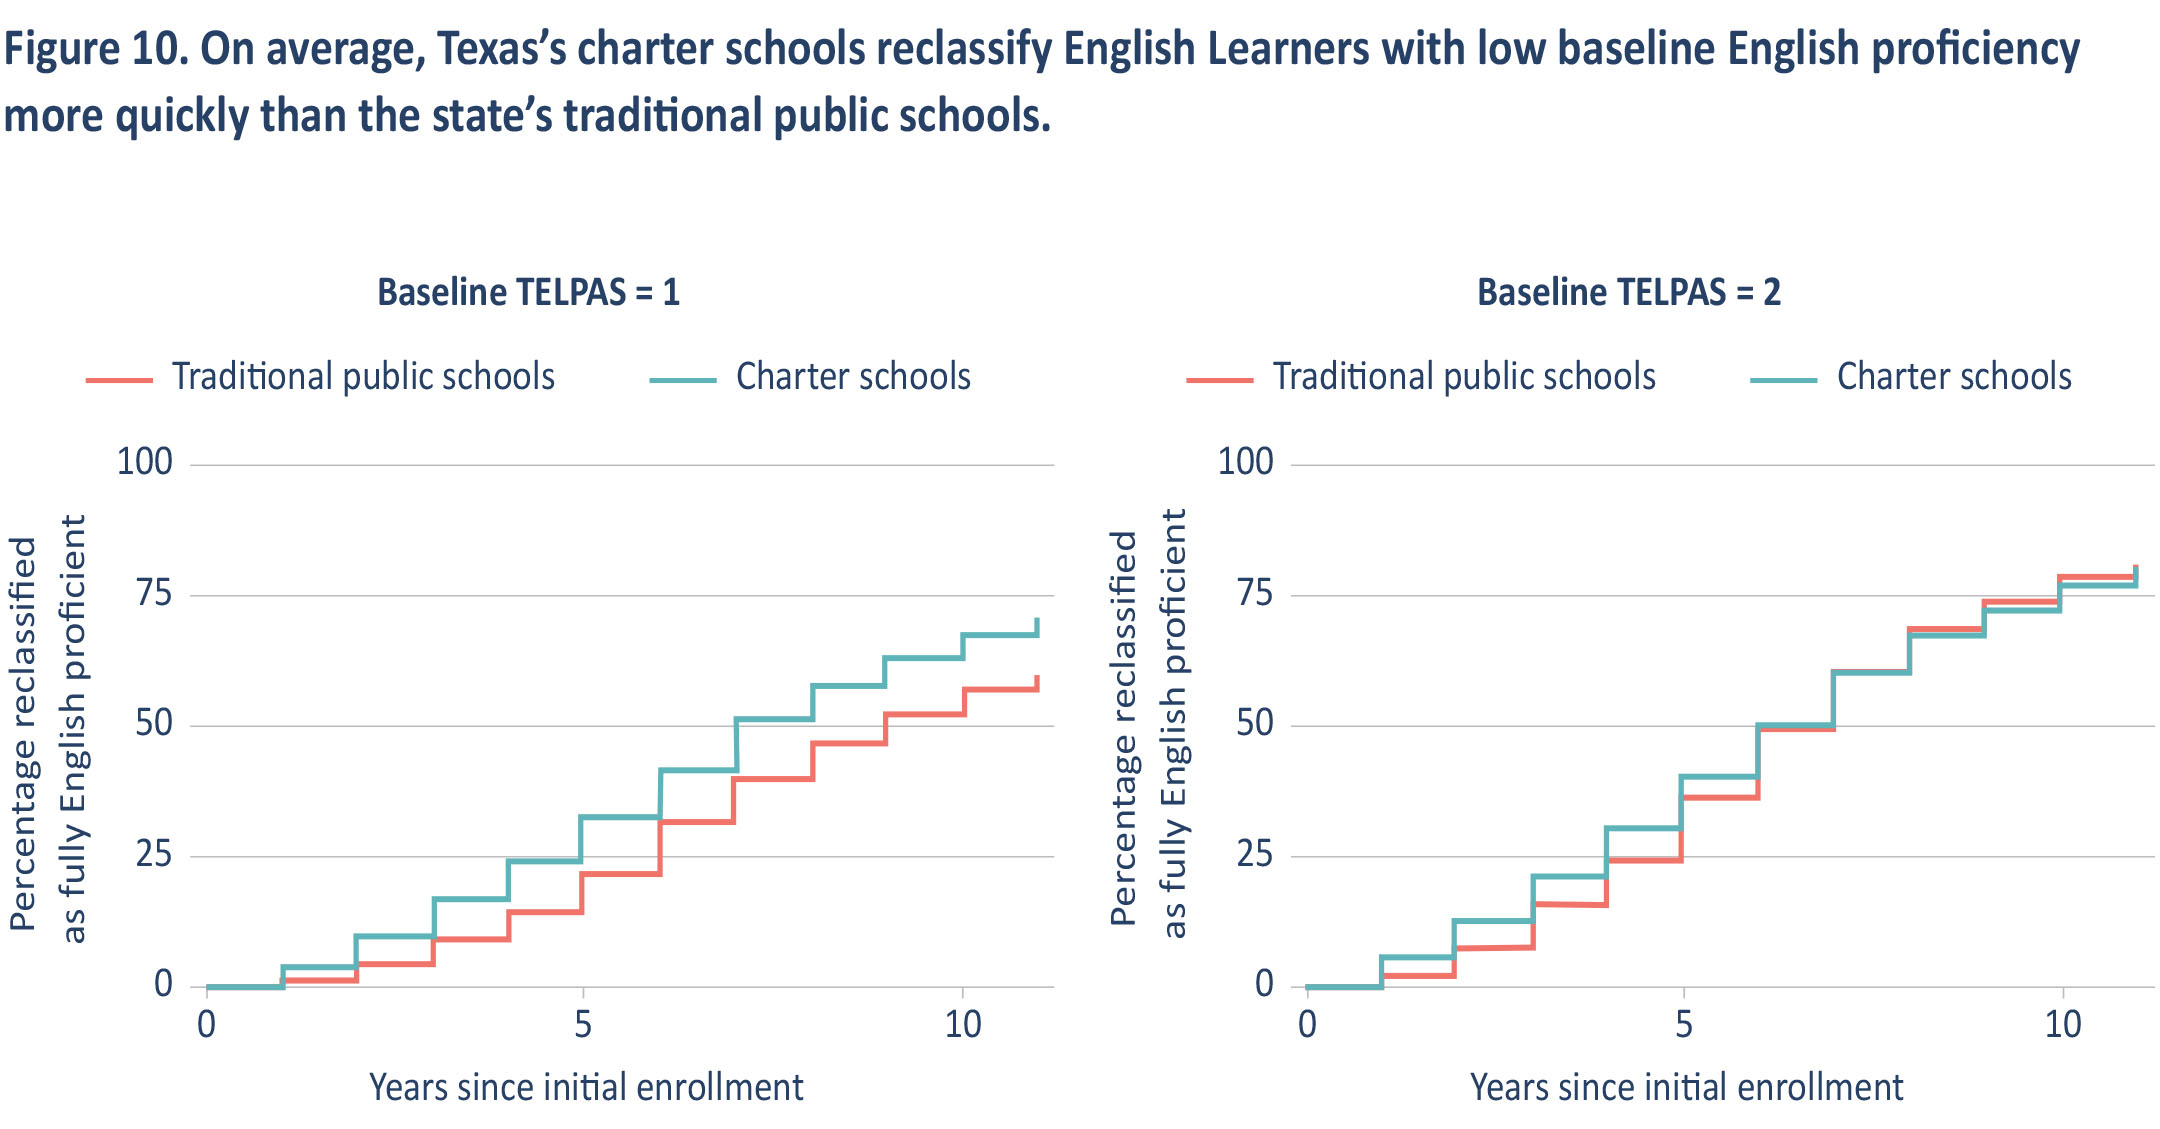 Figure 10. On average, Texas's charter schools reclassify English Learners with low baseline English proficency more quickly that the state's traditional public schools.